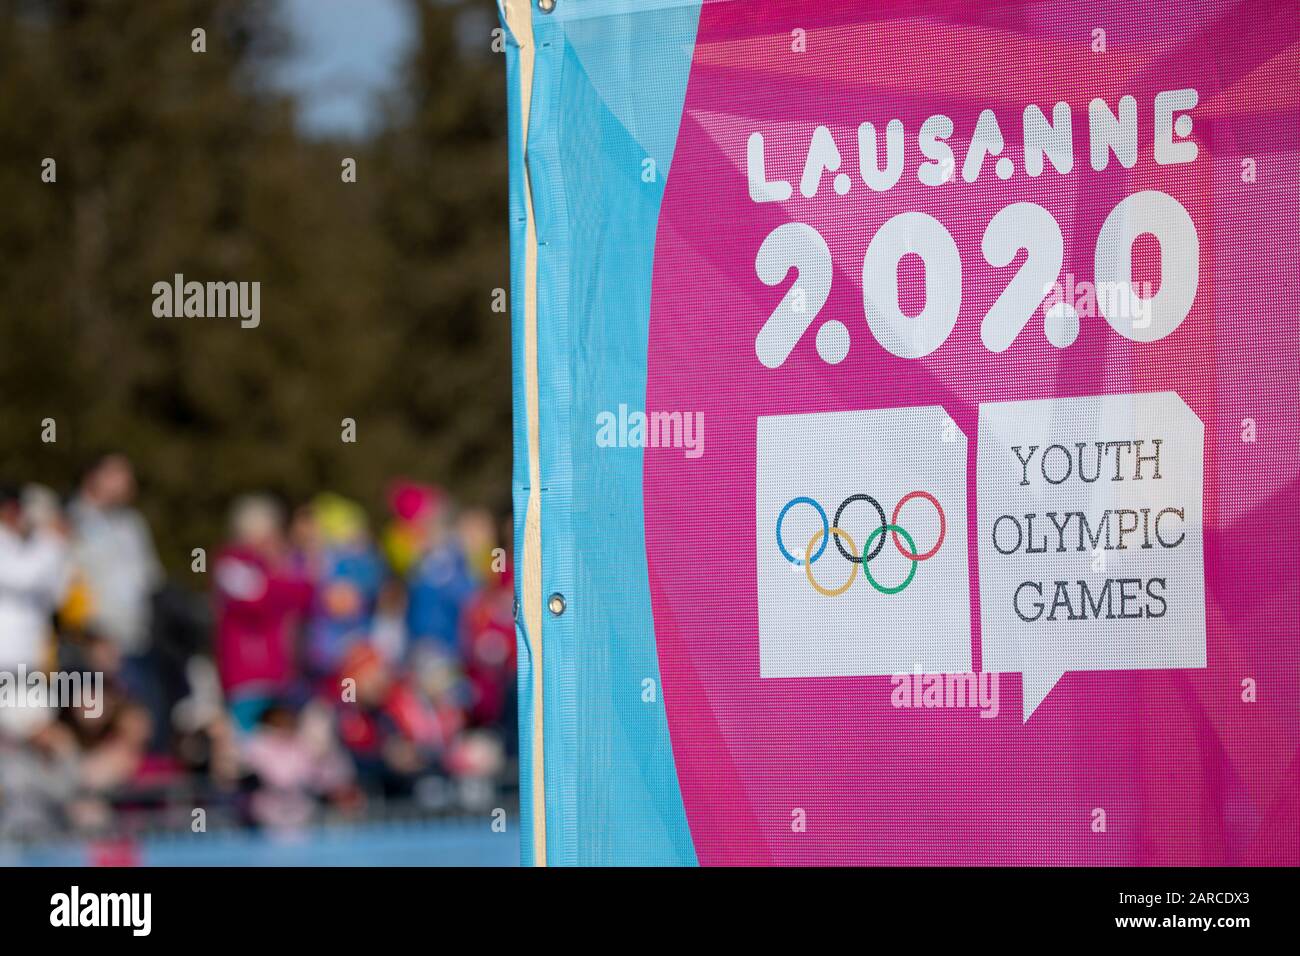 The Lausanne 2020 Youth Olympic Games on the 21st January 2020 at the Vallée de Joux Cross-Country Centre in Switzerland. Stock Photo